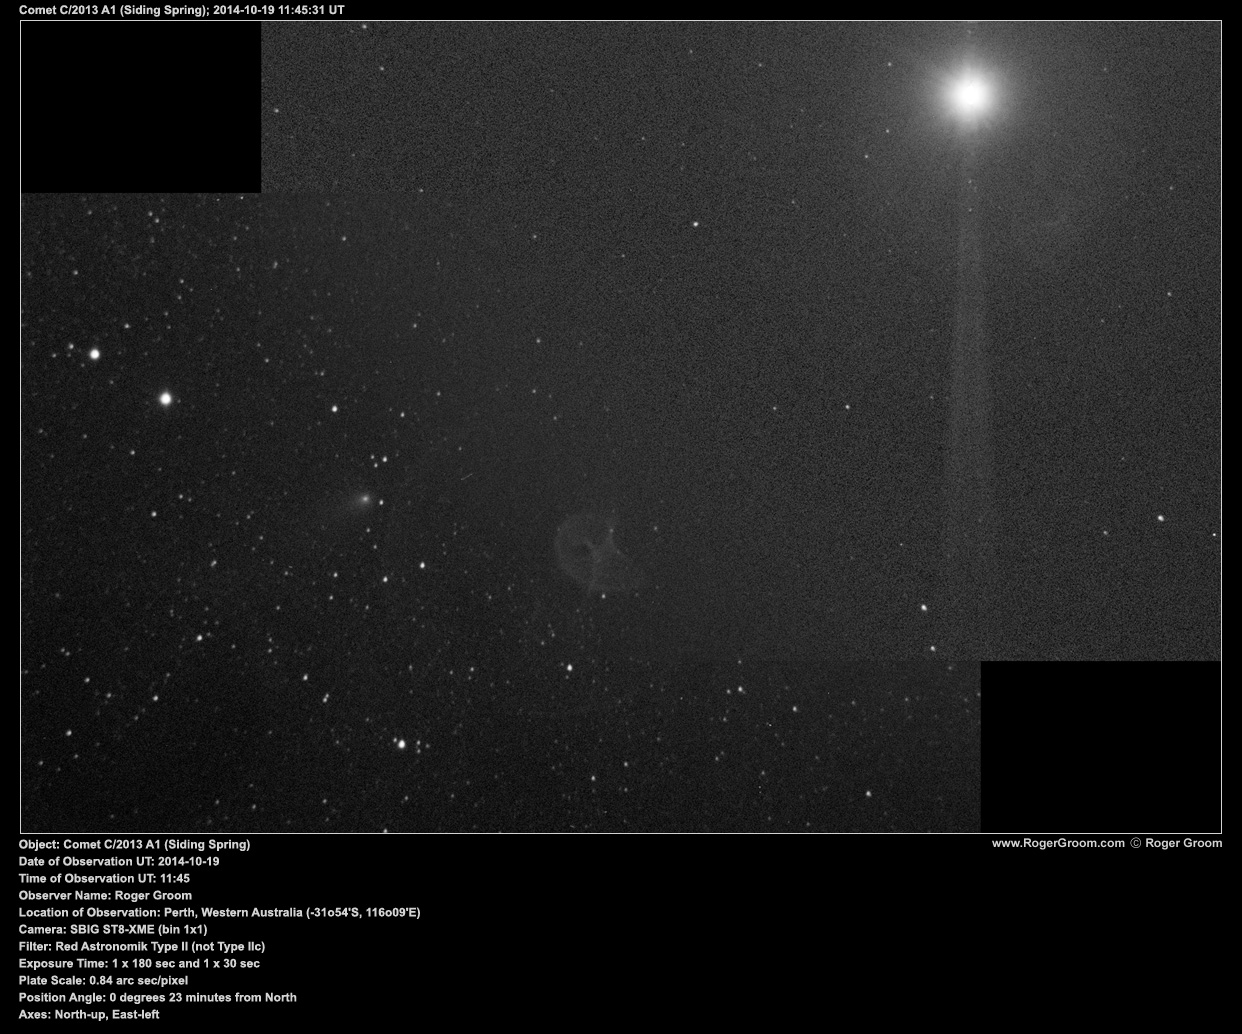 Object: Comet C/2013 A1 (Siding Spring) Date of Observation UT: 2014-10-19 Time of Observation UT: 11:45 Observer Name: Roger Groom Location of Observation: Perth, Western Australia (-31o54'S, 116o09'E) Camera: SBIG ST8-XME (bin 1x1) Filter: Red Astronomik Type II (not Type IIc) Exposure Time: 1 x 180 sec and 1 x 30 sec Plate Scale: 0.84 arc sec/pixel Position Angle: 0 degrees 23 minutes from North Axes: North-up, East-left